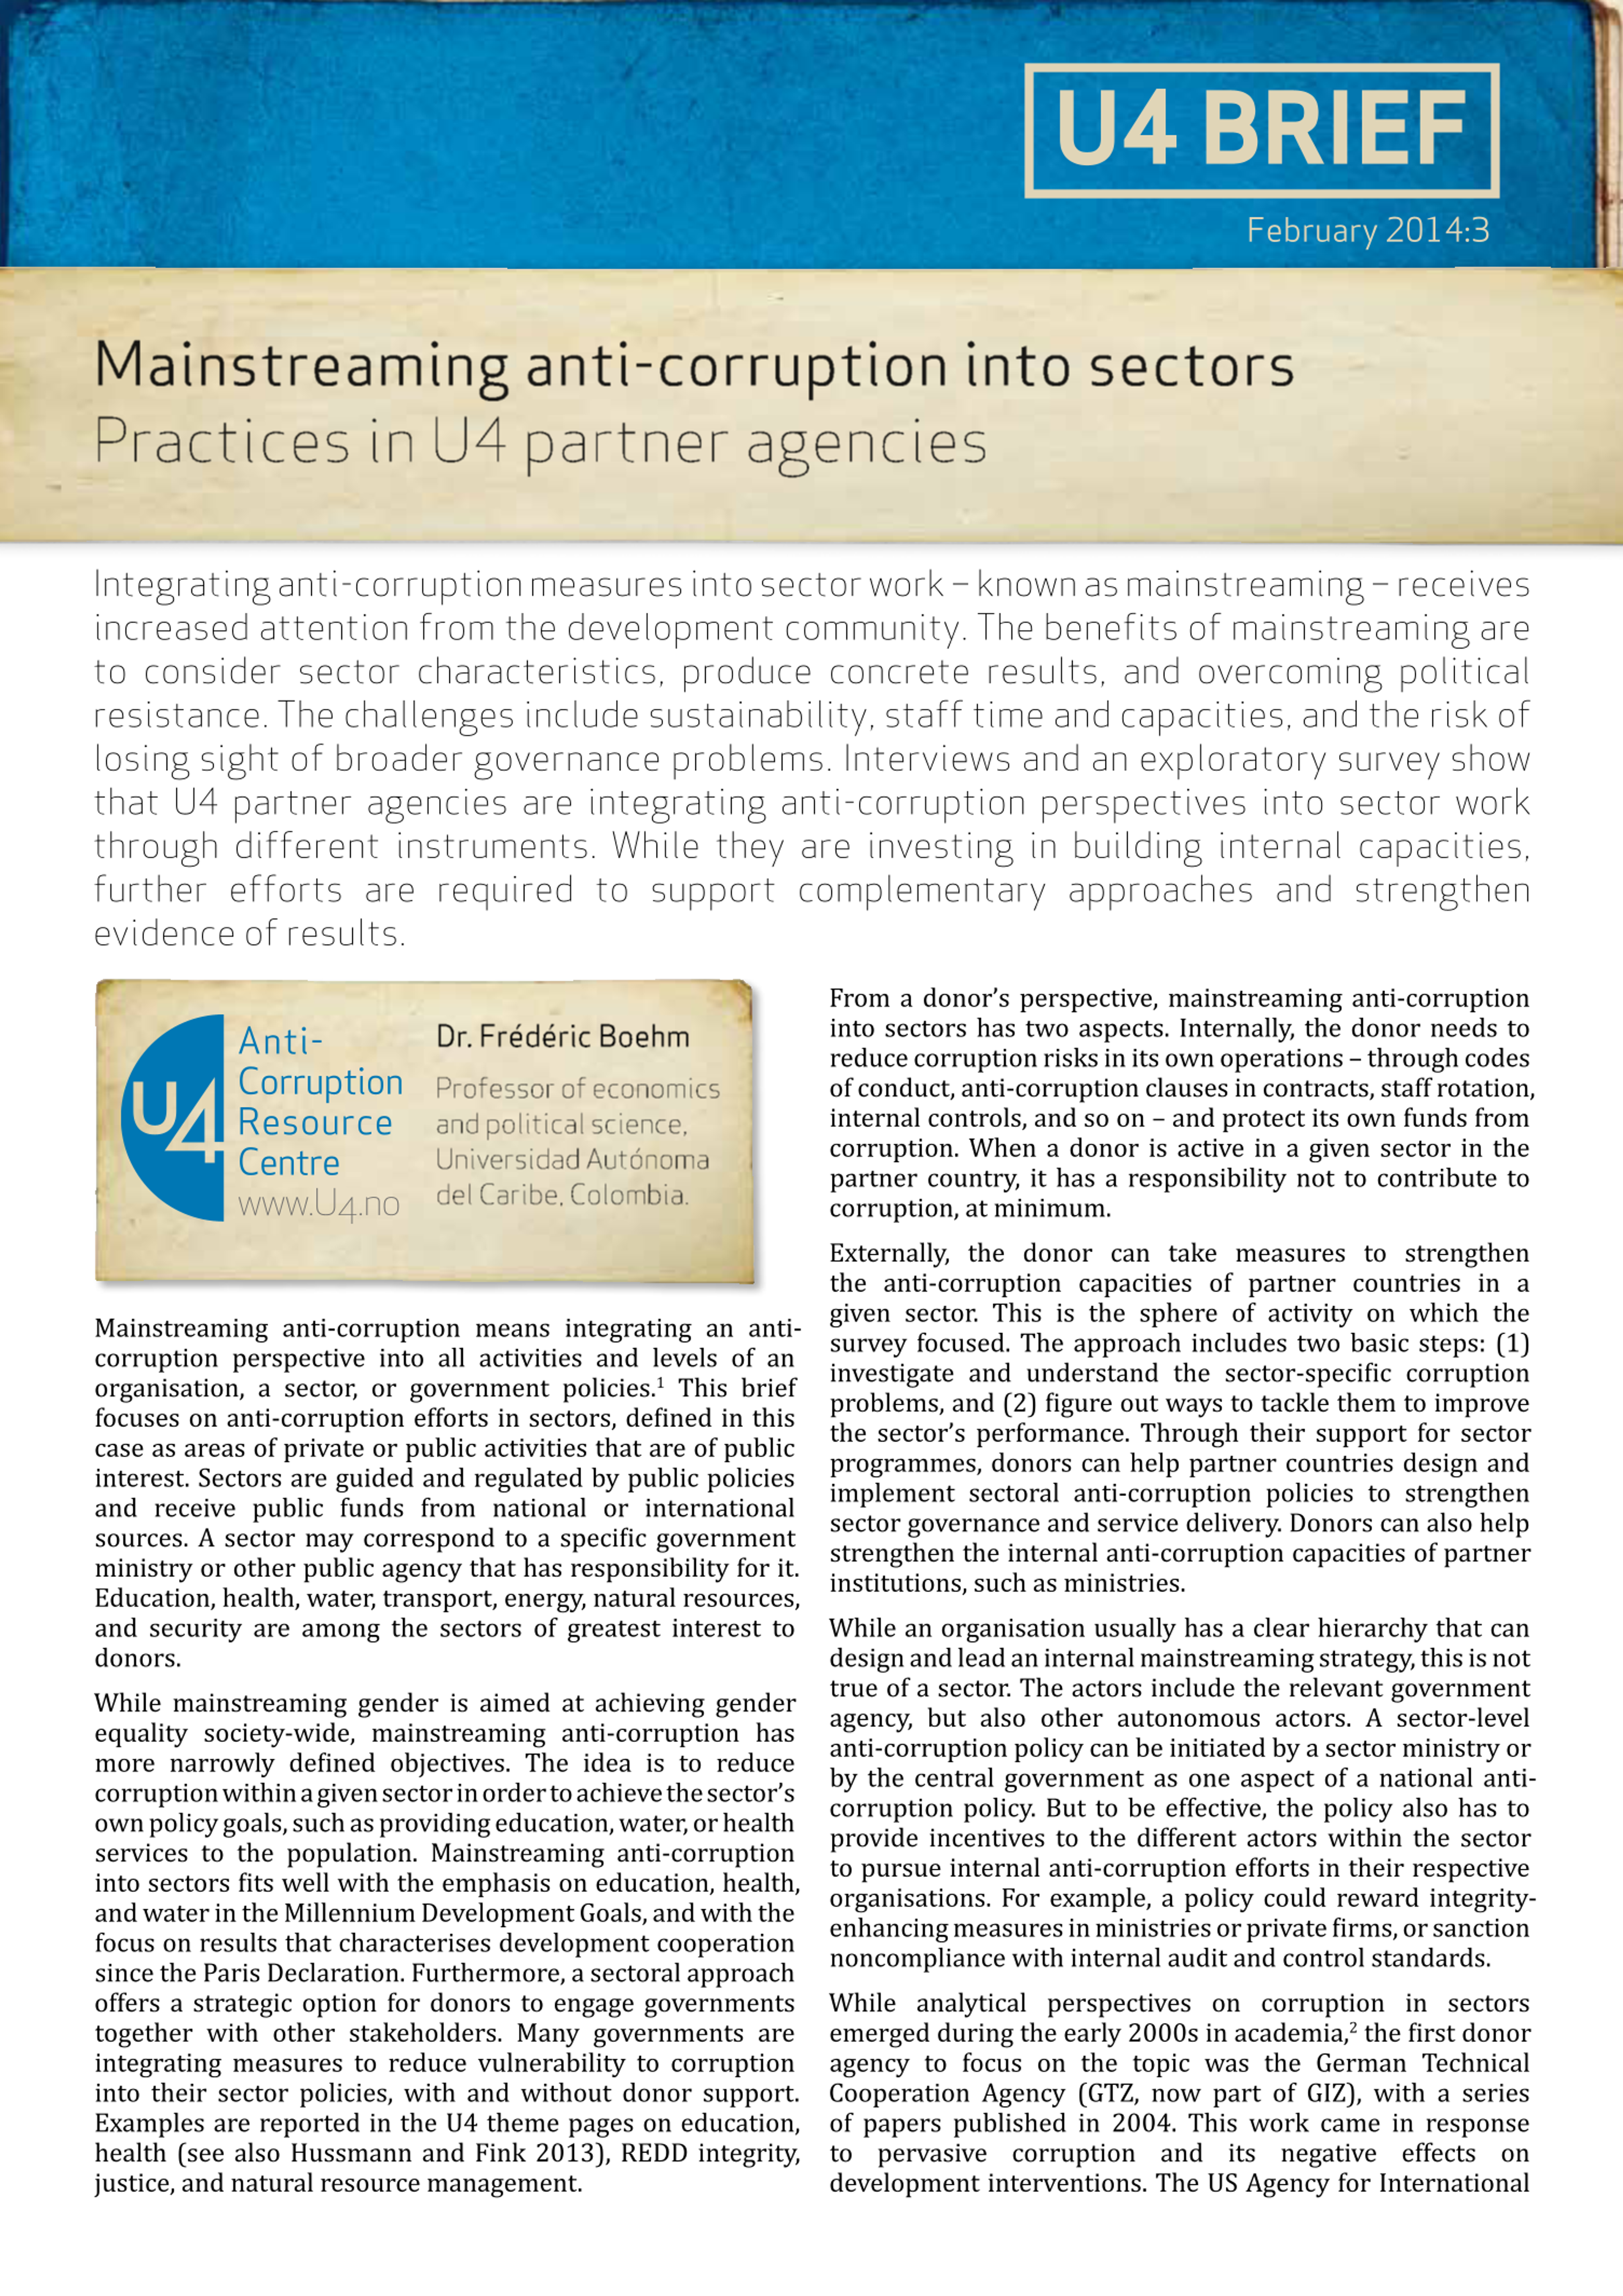 Mainstreaming anti-corruption into sectors: Practices in U4 partner agencies